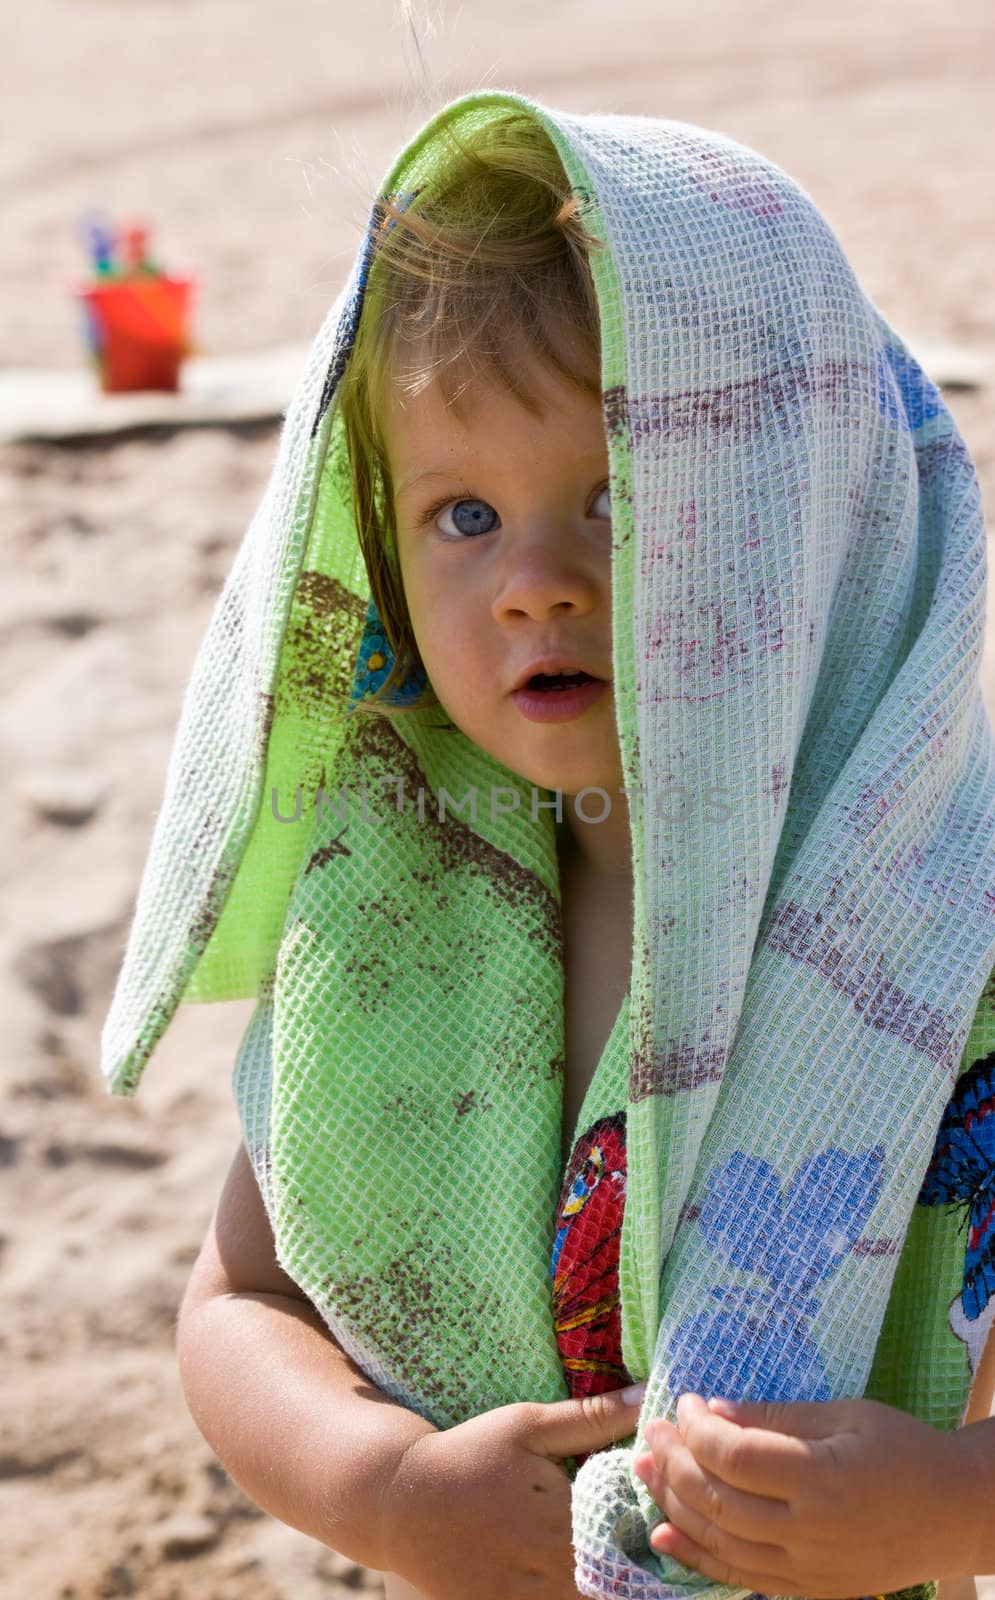 portrait of little girl with green towel